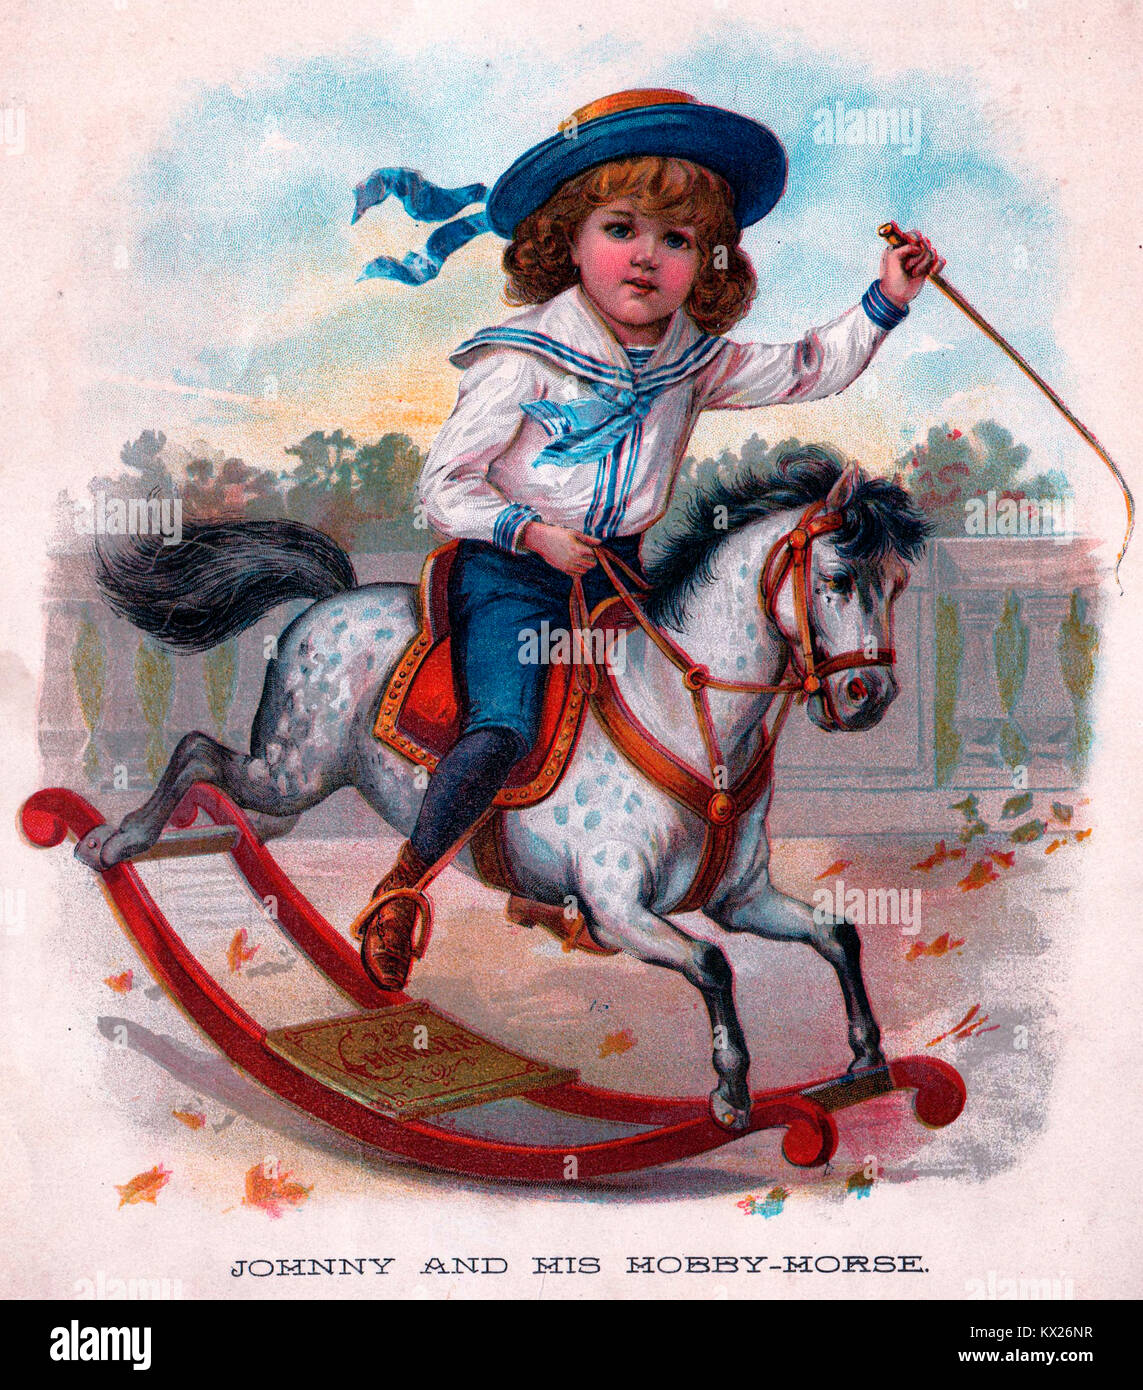 Johnnie and his hobby horse -  Victorian Era image of little boy riding a hobby horse Stock Photo